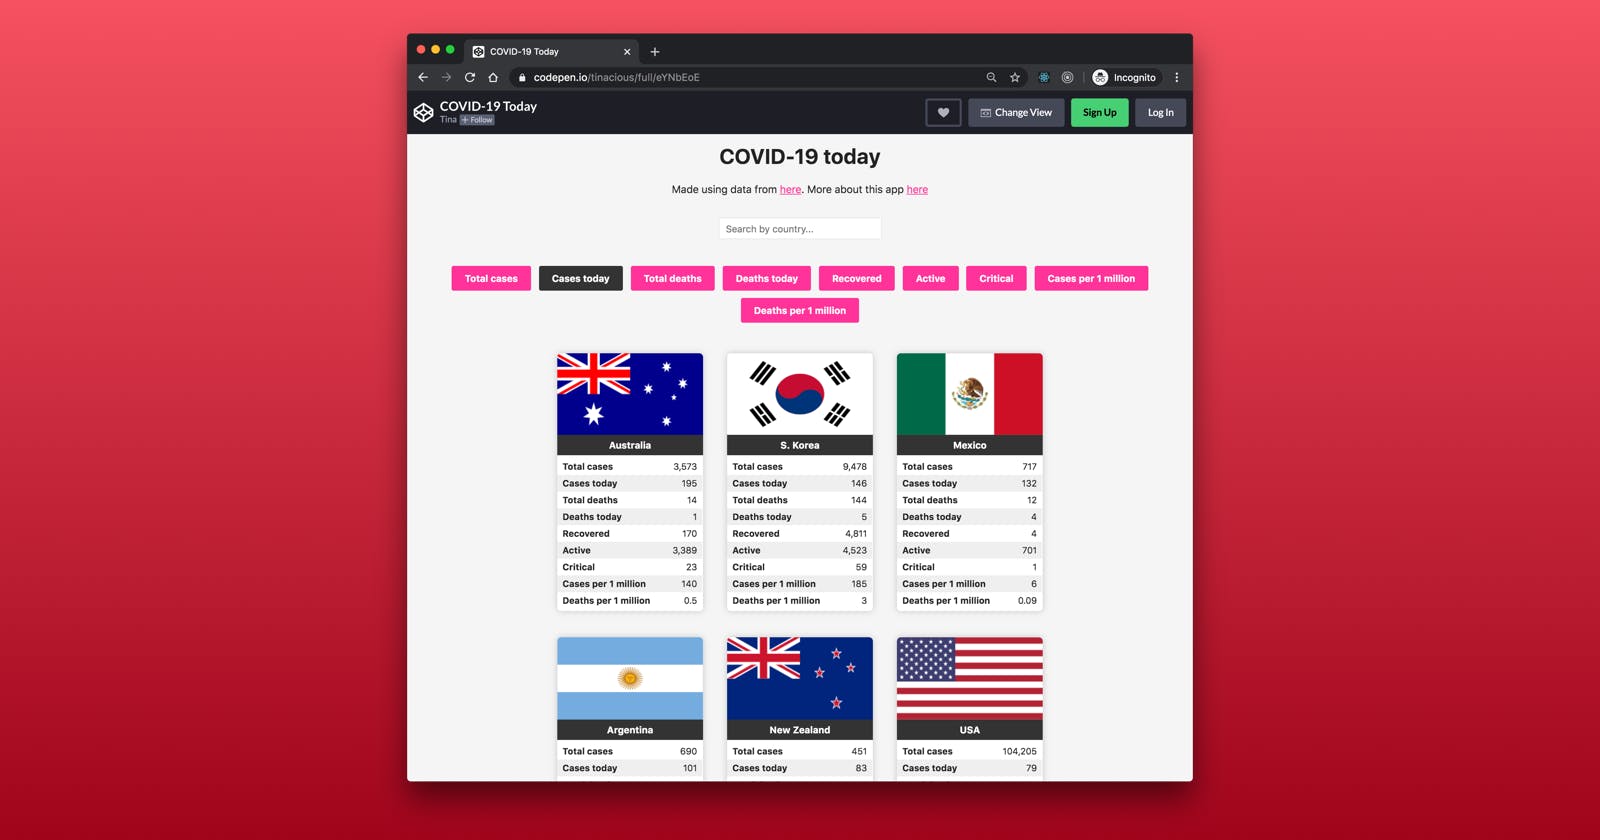 COVID-19 data by country